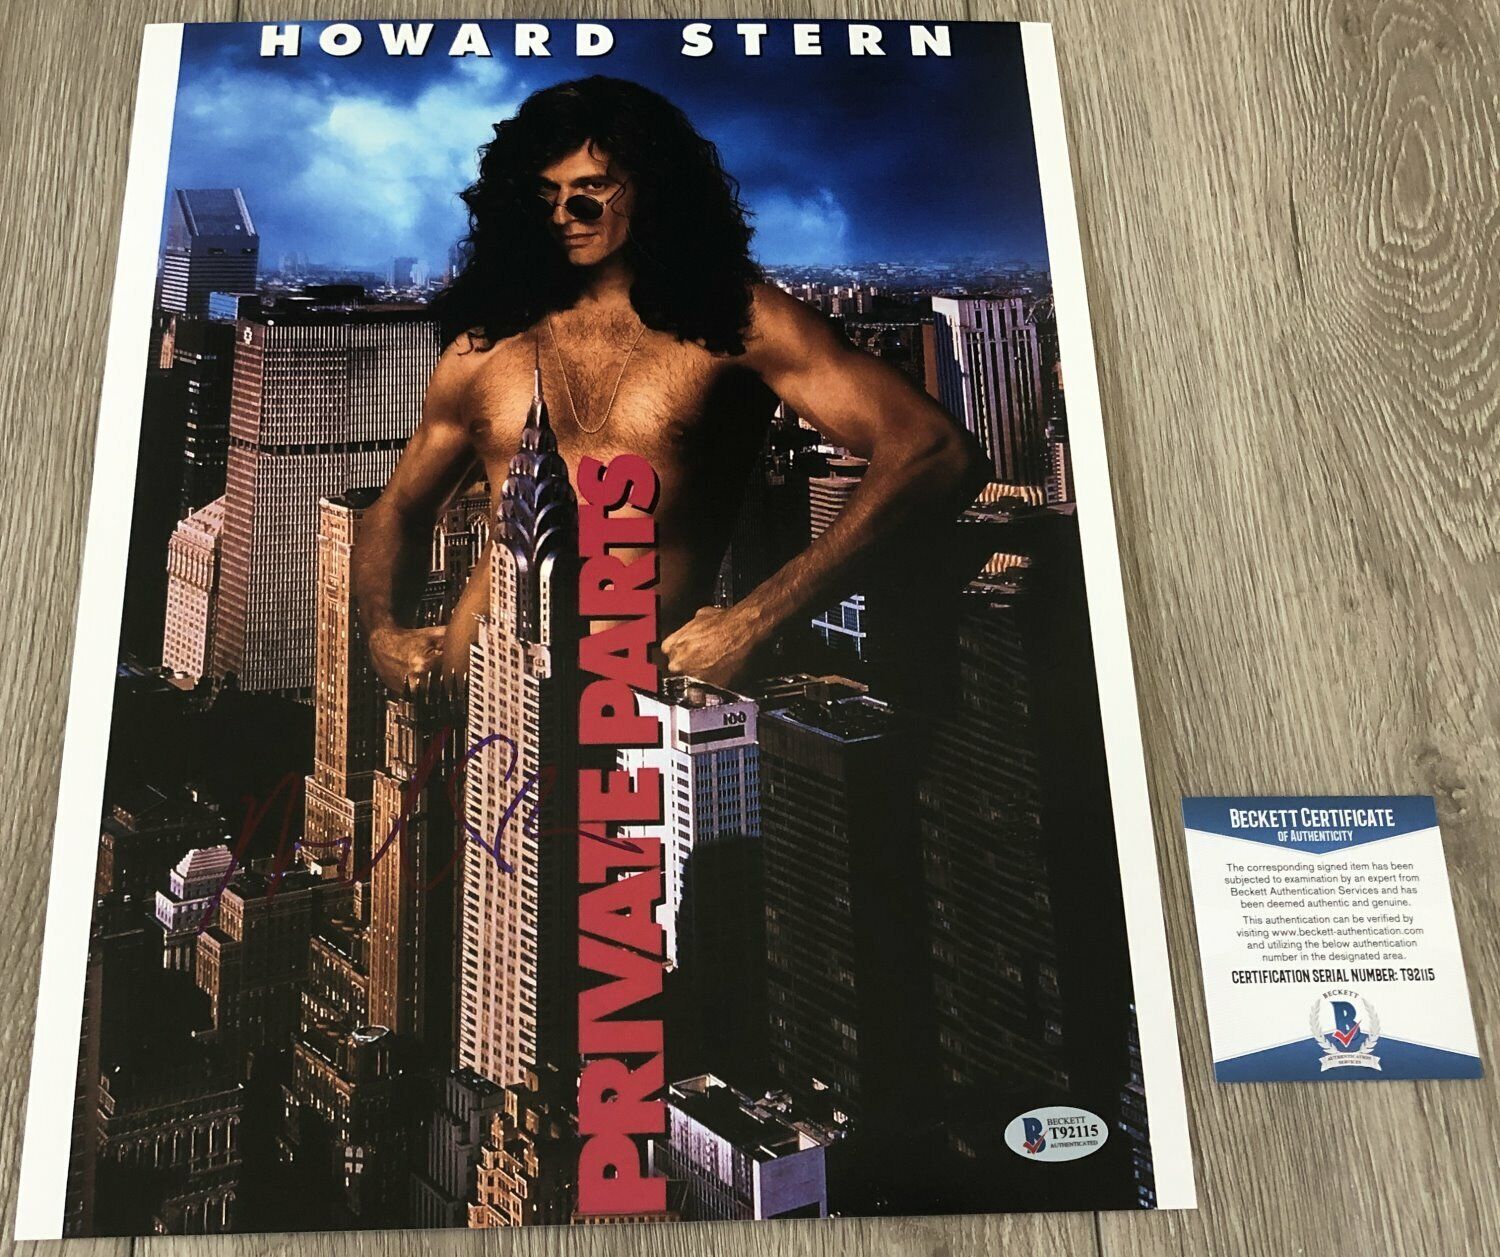 HOWARD STERN SIGNED AUTOGRAPH PRIVATE PARTS 11x14 Photo Poster painting & BECKETT BAS COA